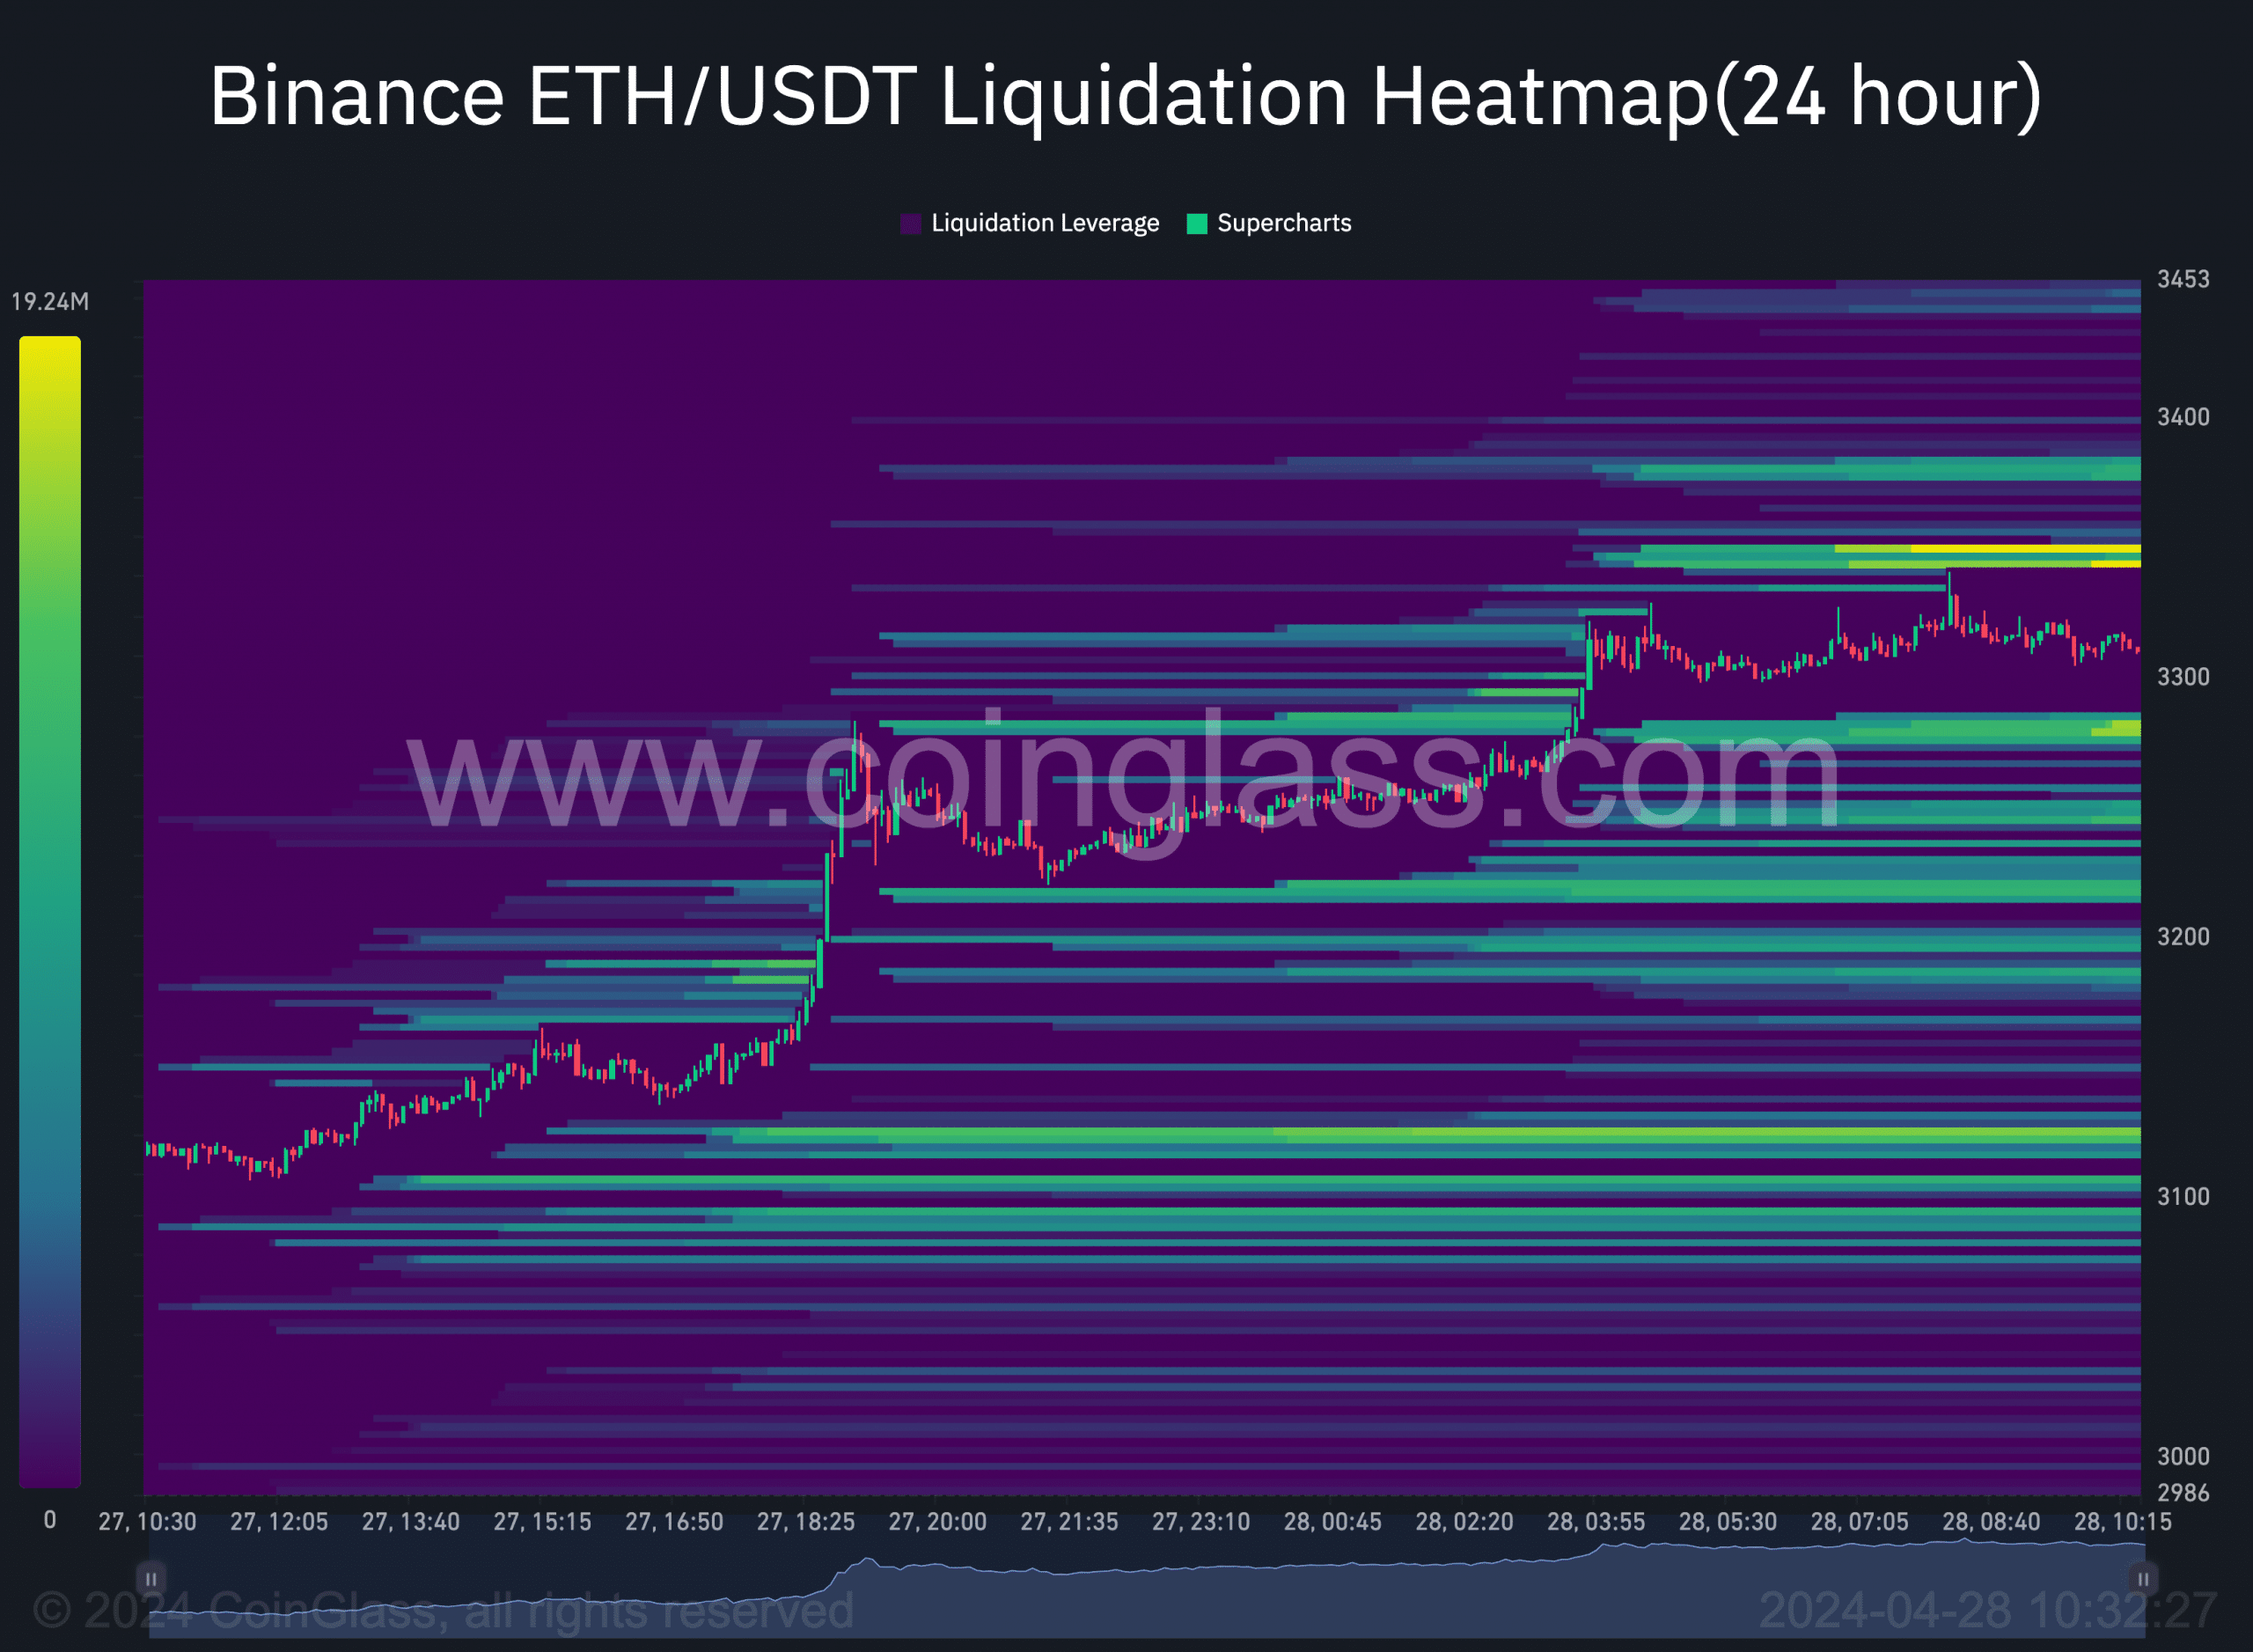 The liquidation heatmap identifies a resistance for ETH